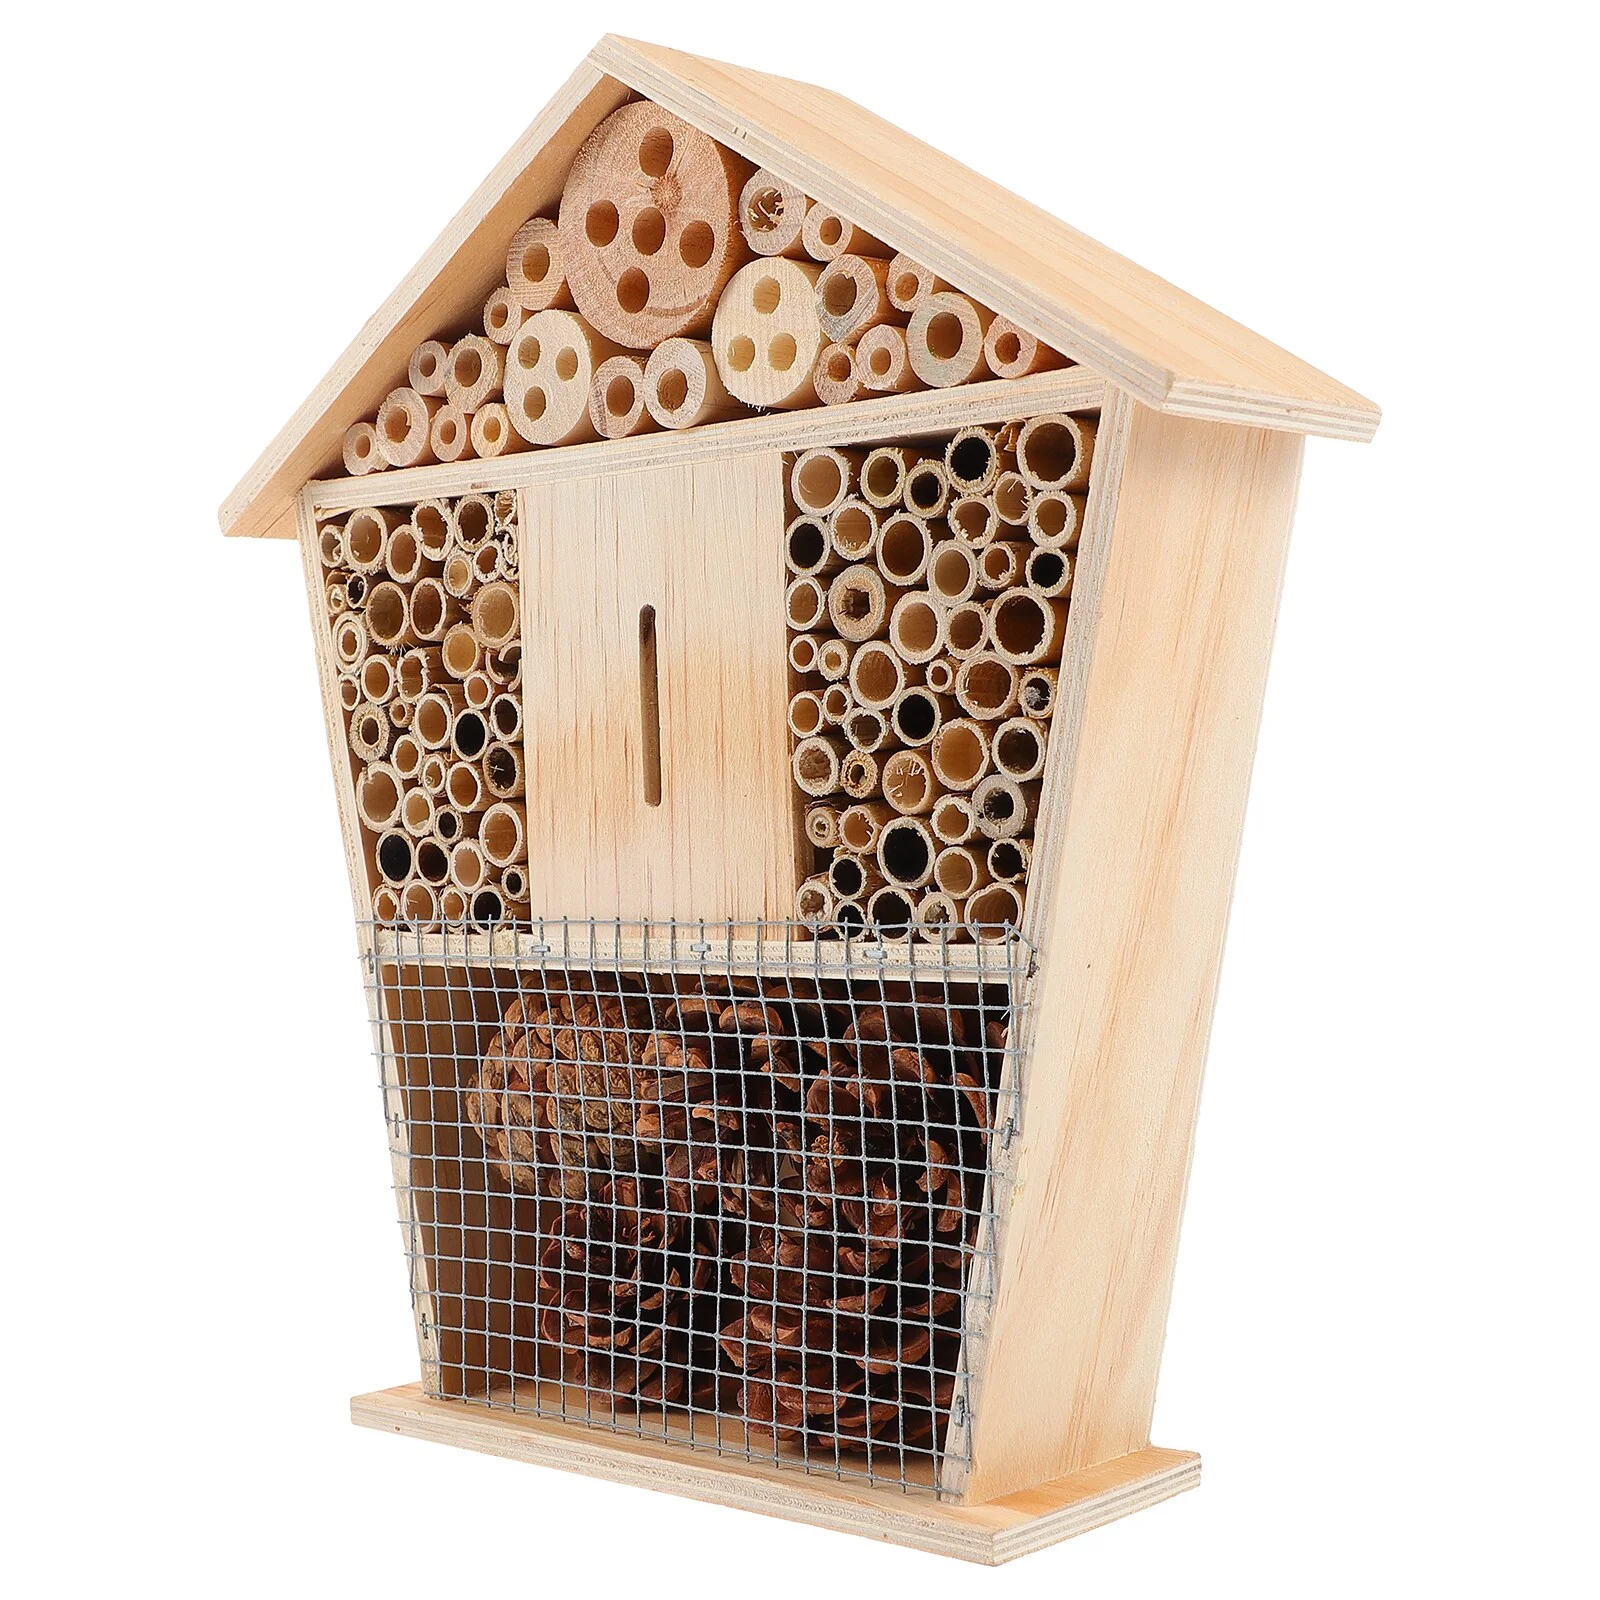 Wooden Beehive Gifts Lovers Carpenter House Houses The Garden Tubes Hotel Ladybug